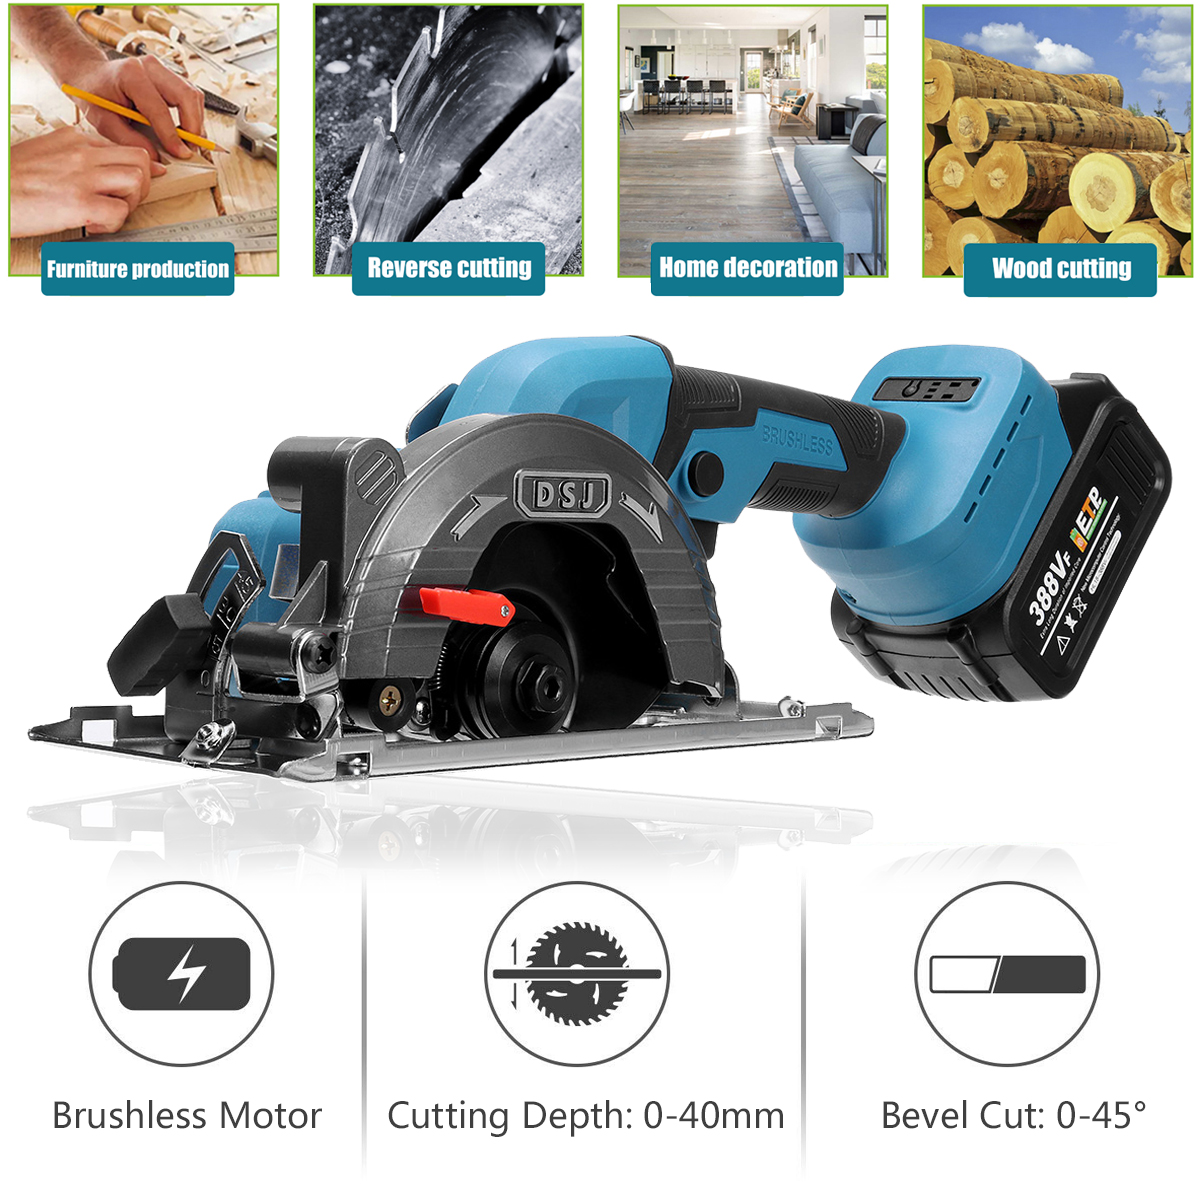 Electric-Circular-Saw-388VF-125mm-Saw-Blade-Brushless-Multi-Angle-Cutting-Suitable-With-18v-Battery-1941553-5